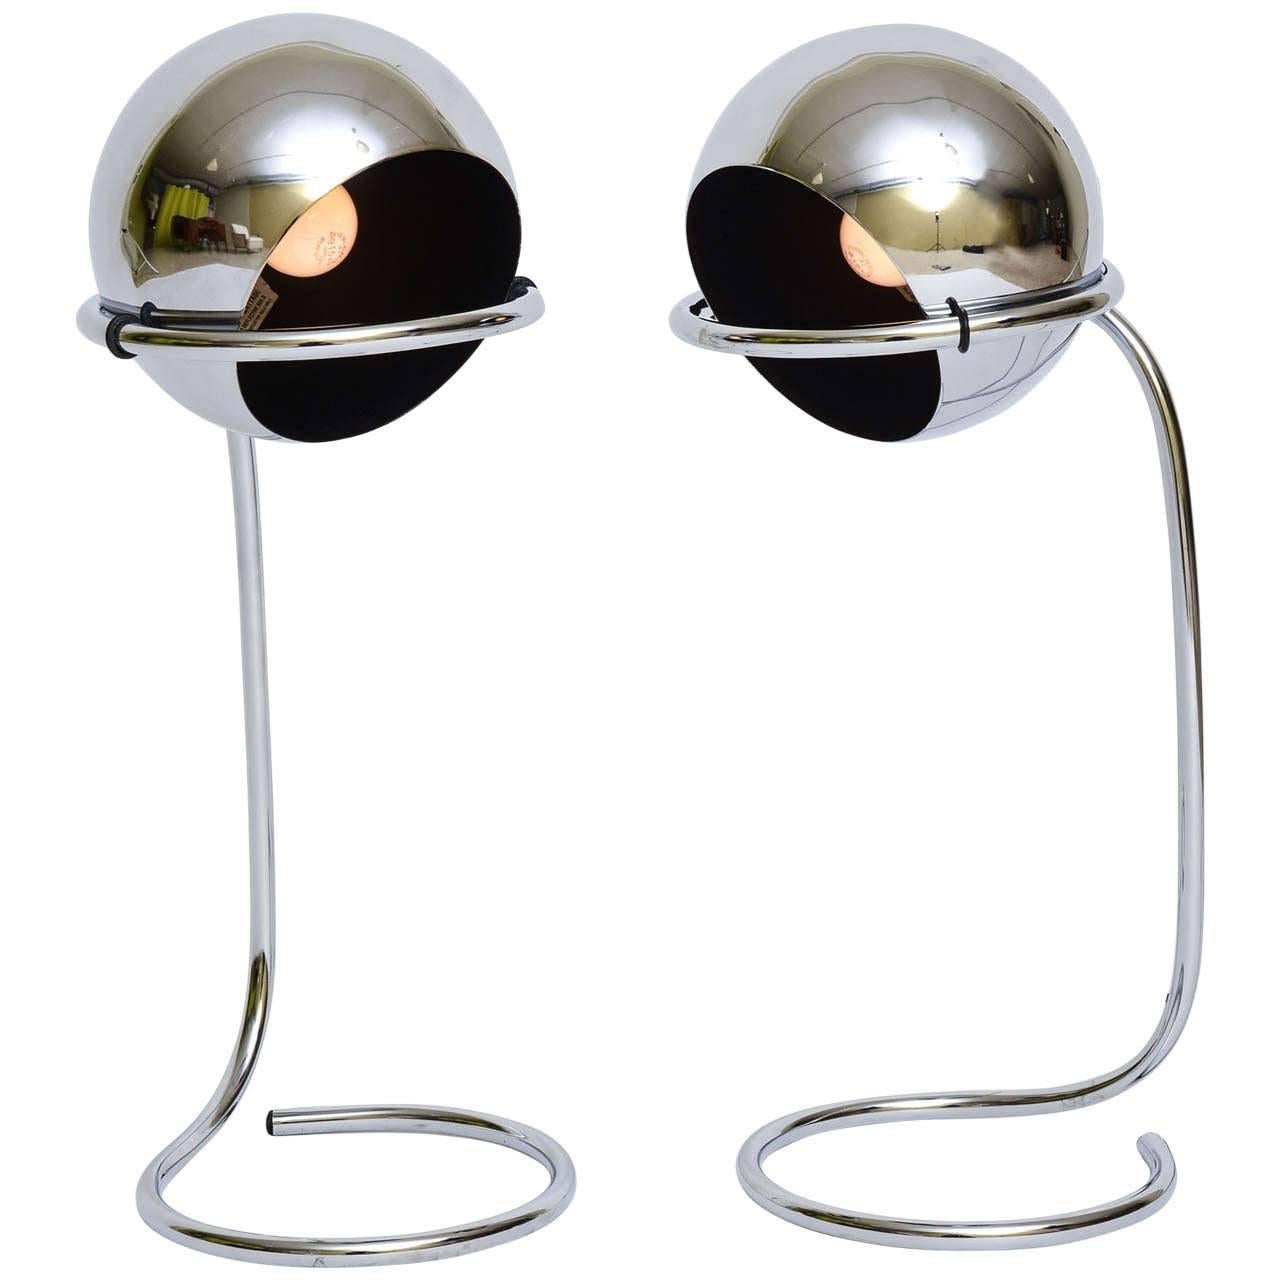 Exciting 1960s Space Age Articulated Chrome Ball Table Lamps